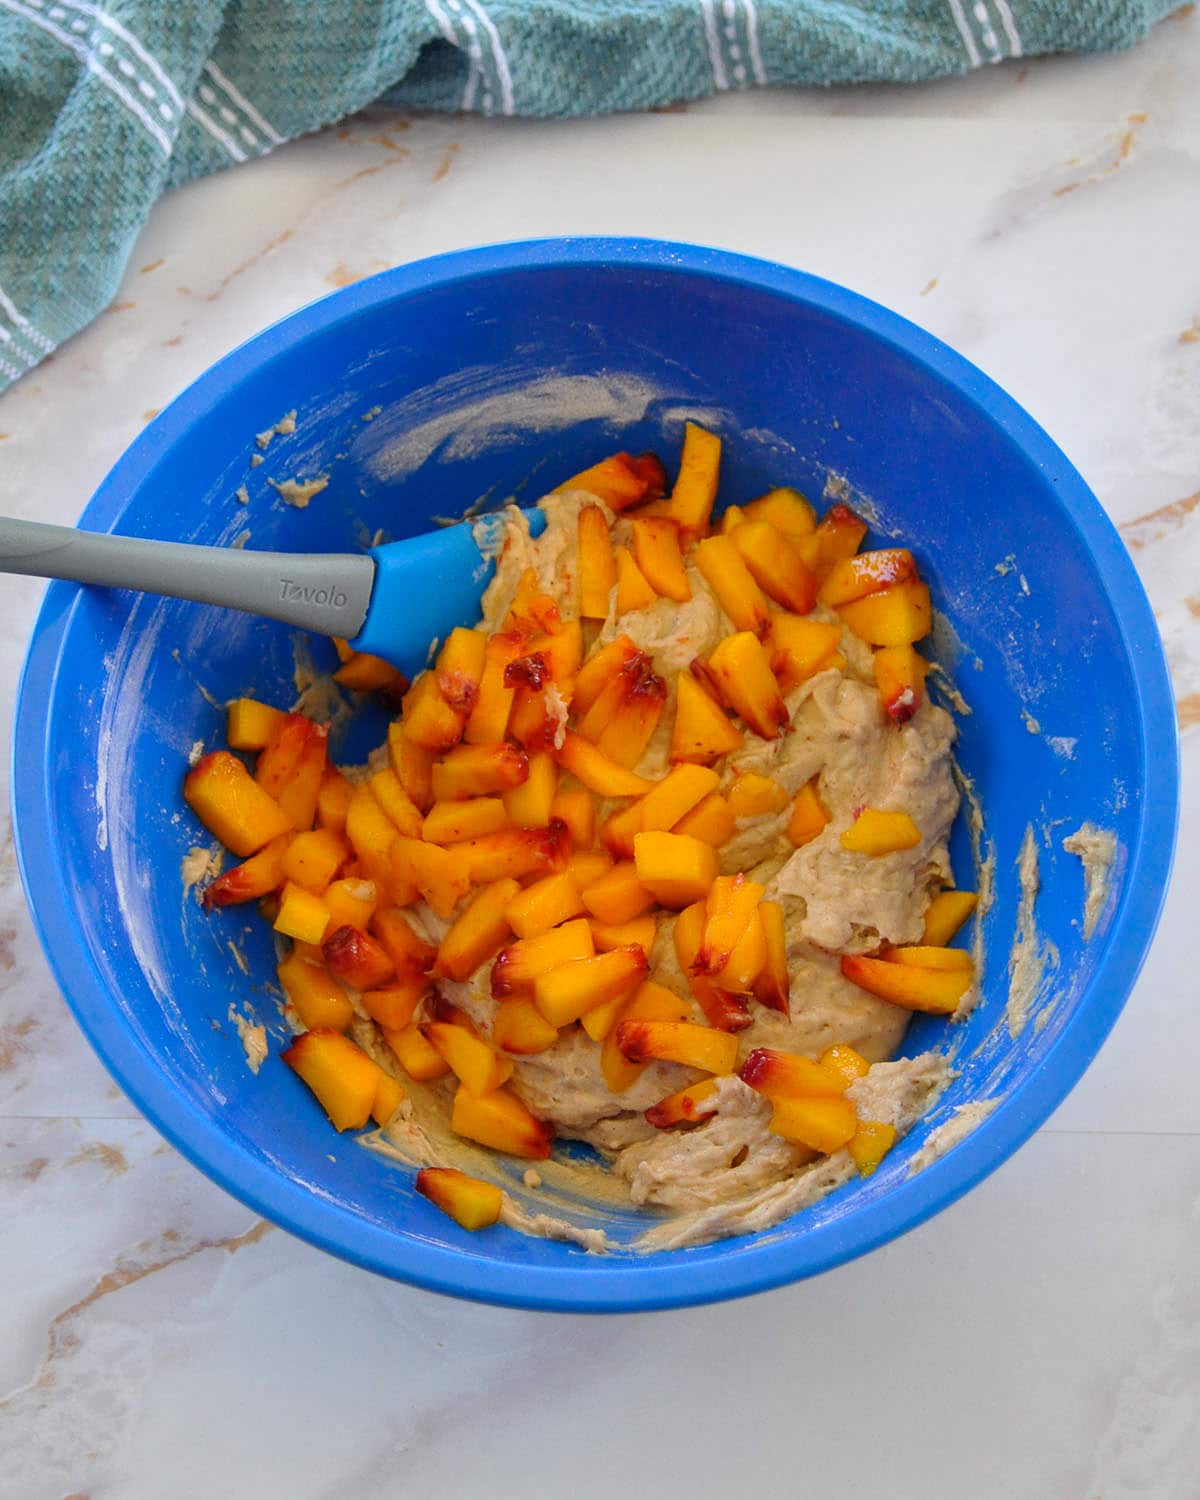 diced peaches in a blue bowl with muffin batter